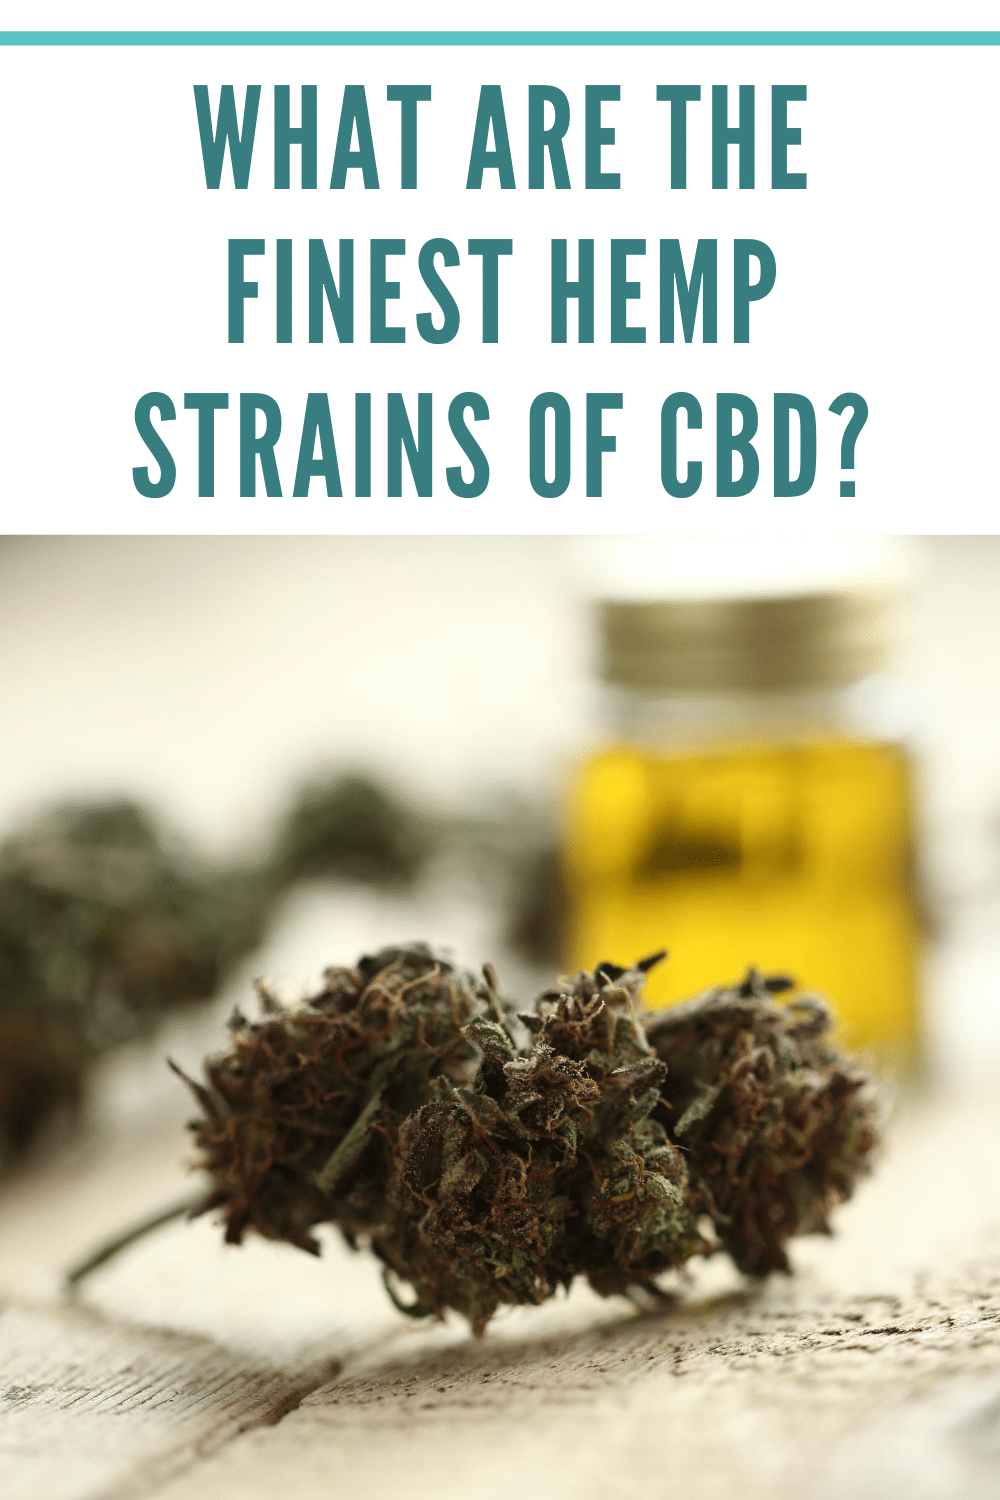 What Are The Finest Hemp Strains Of CBD?